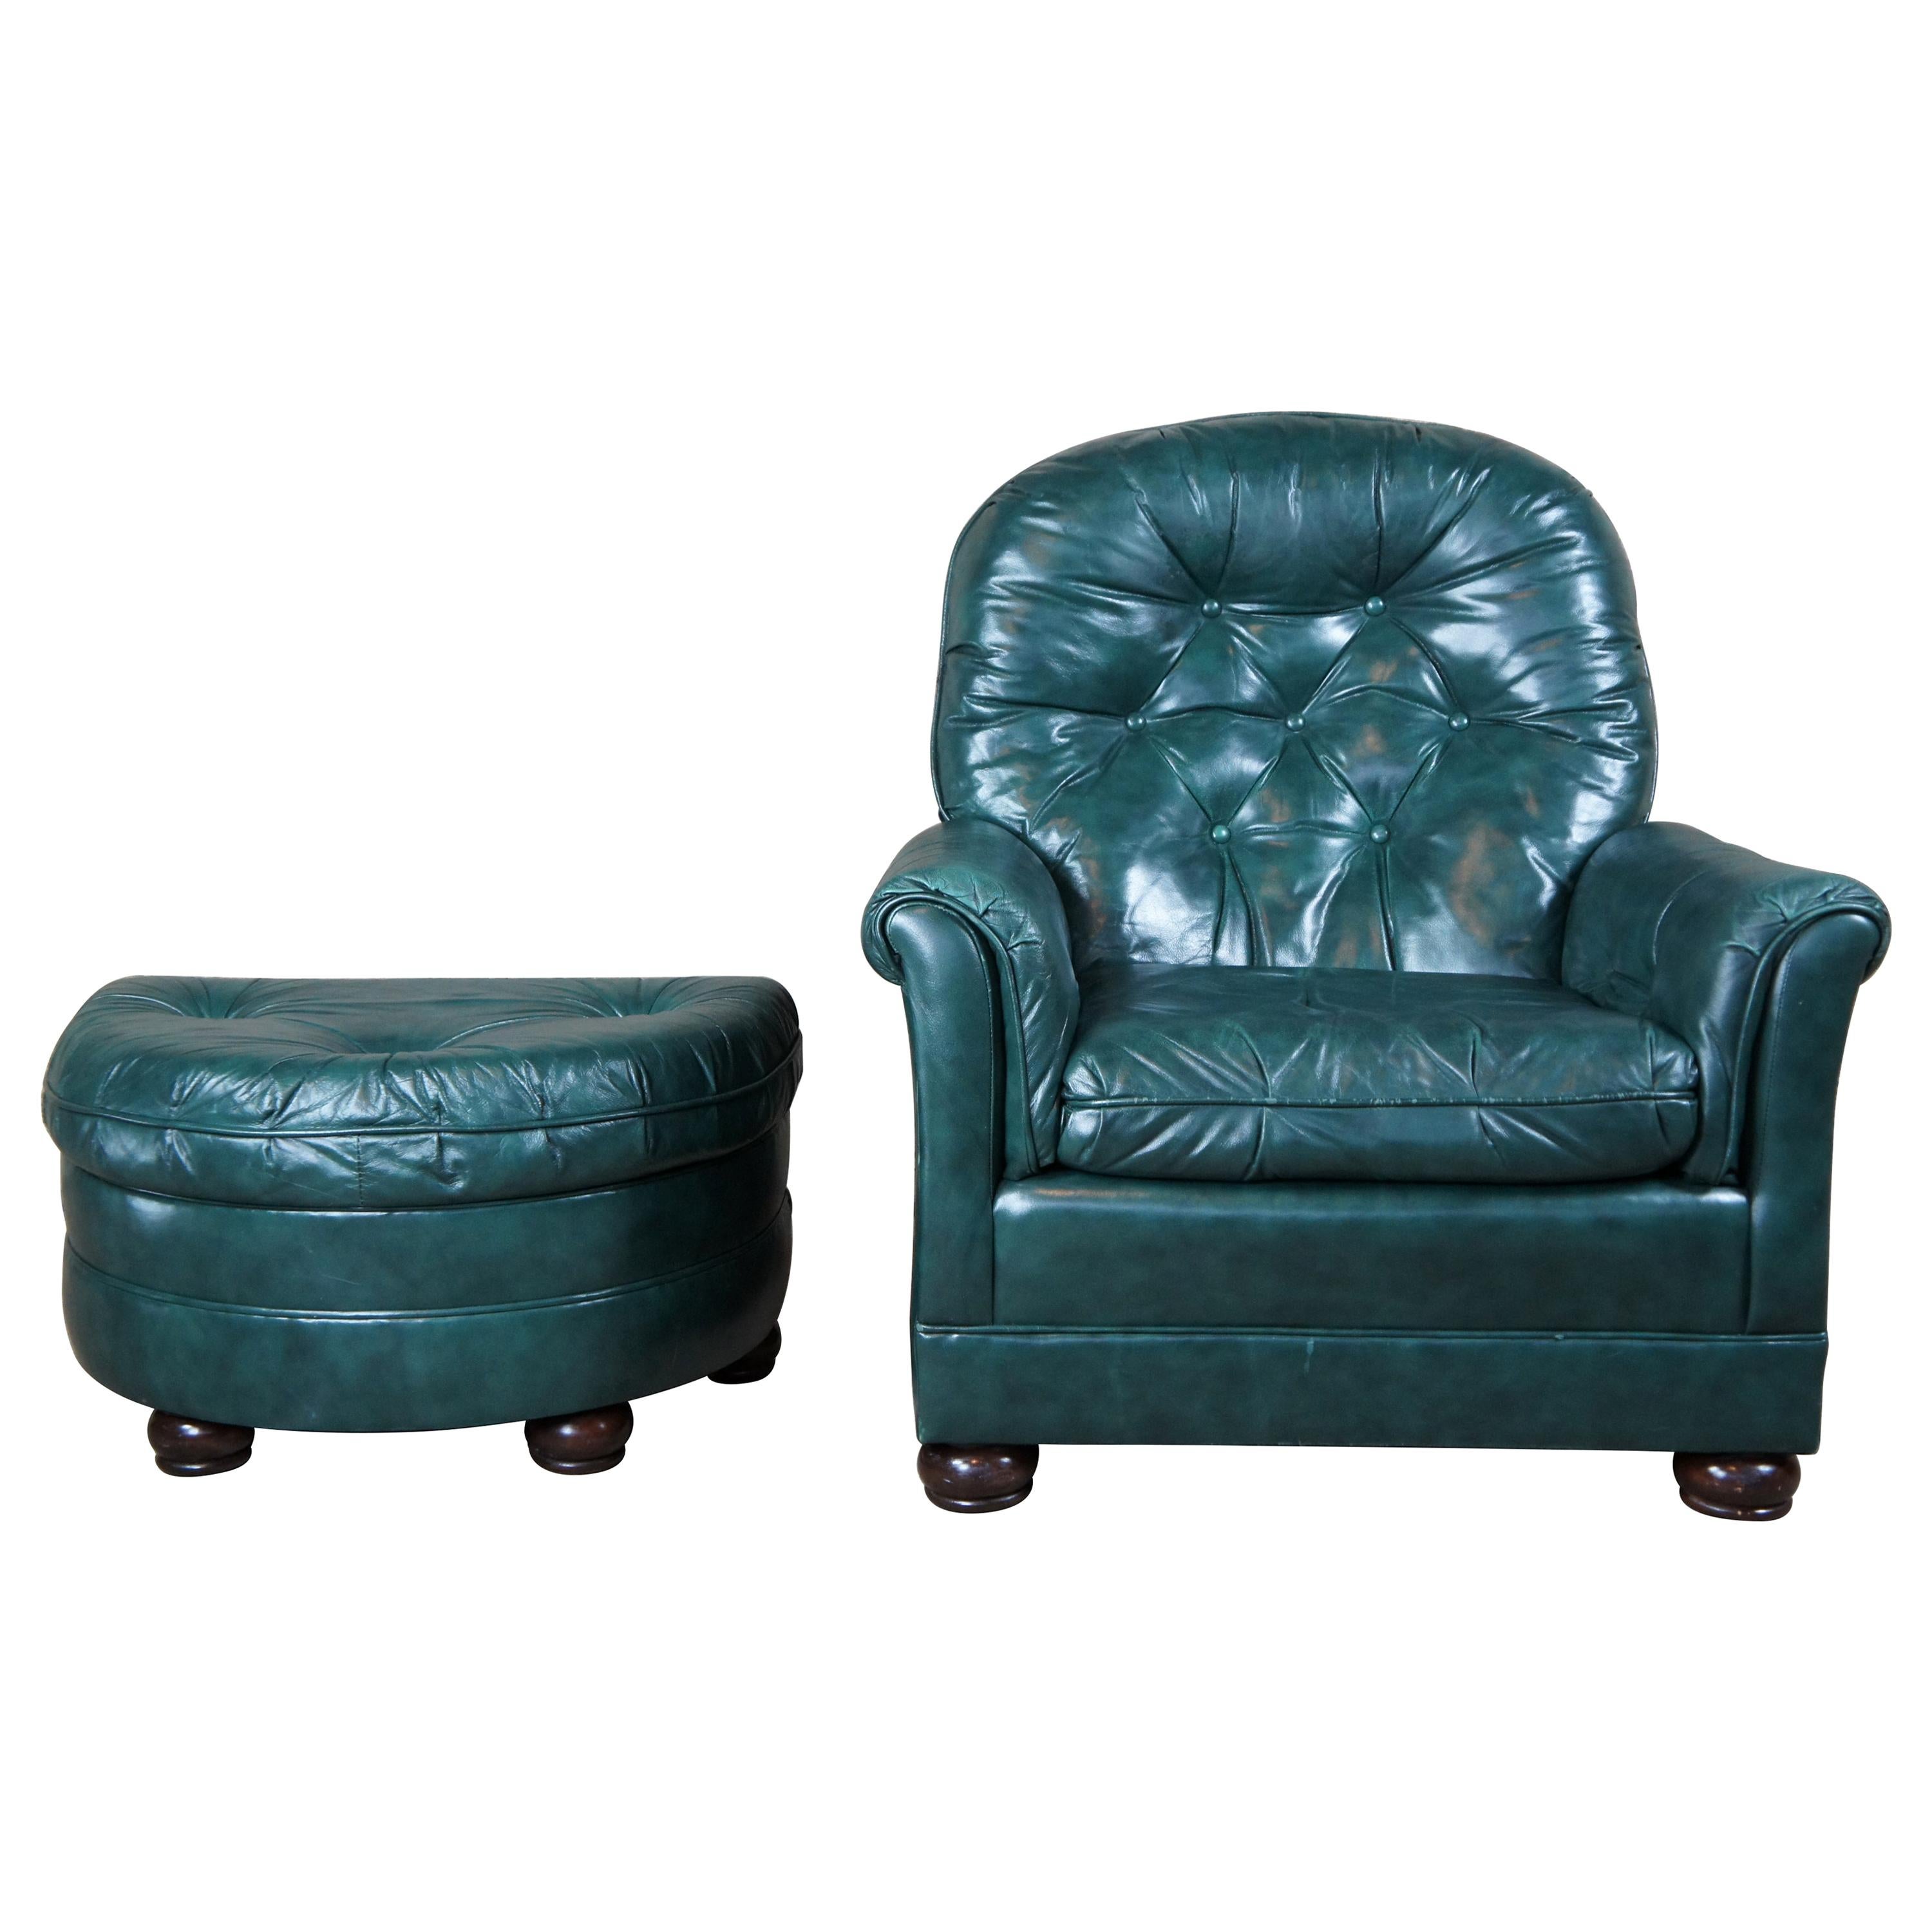 Bradington Young Tufted Green Leather Reclining Rockwell Chair and Ottoman